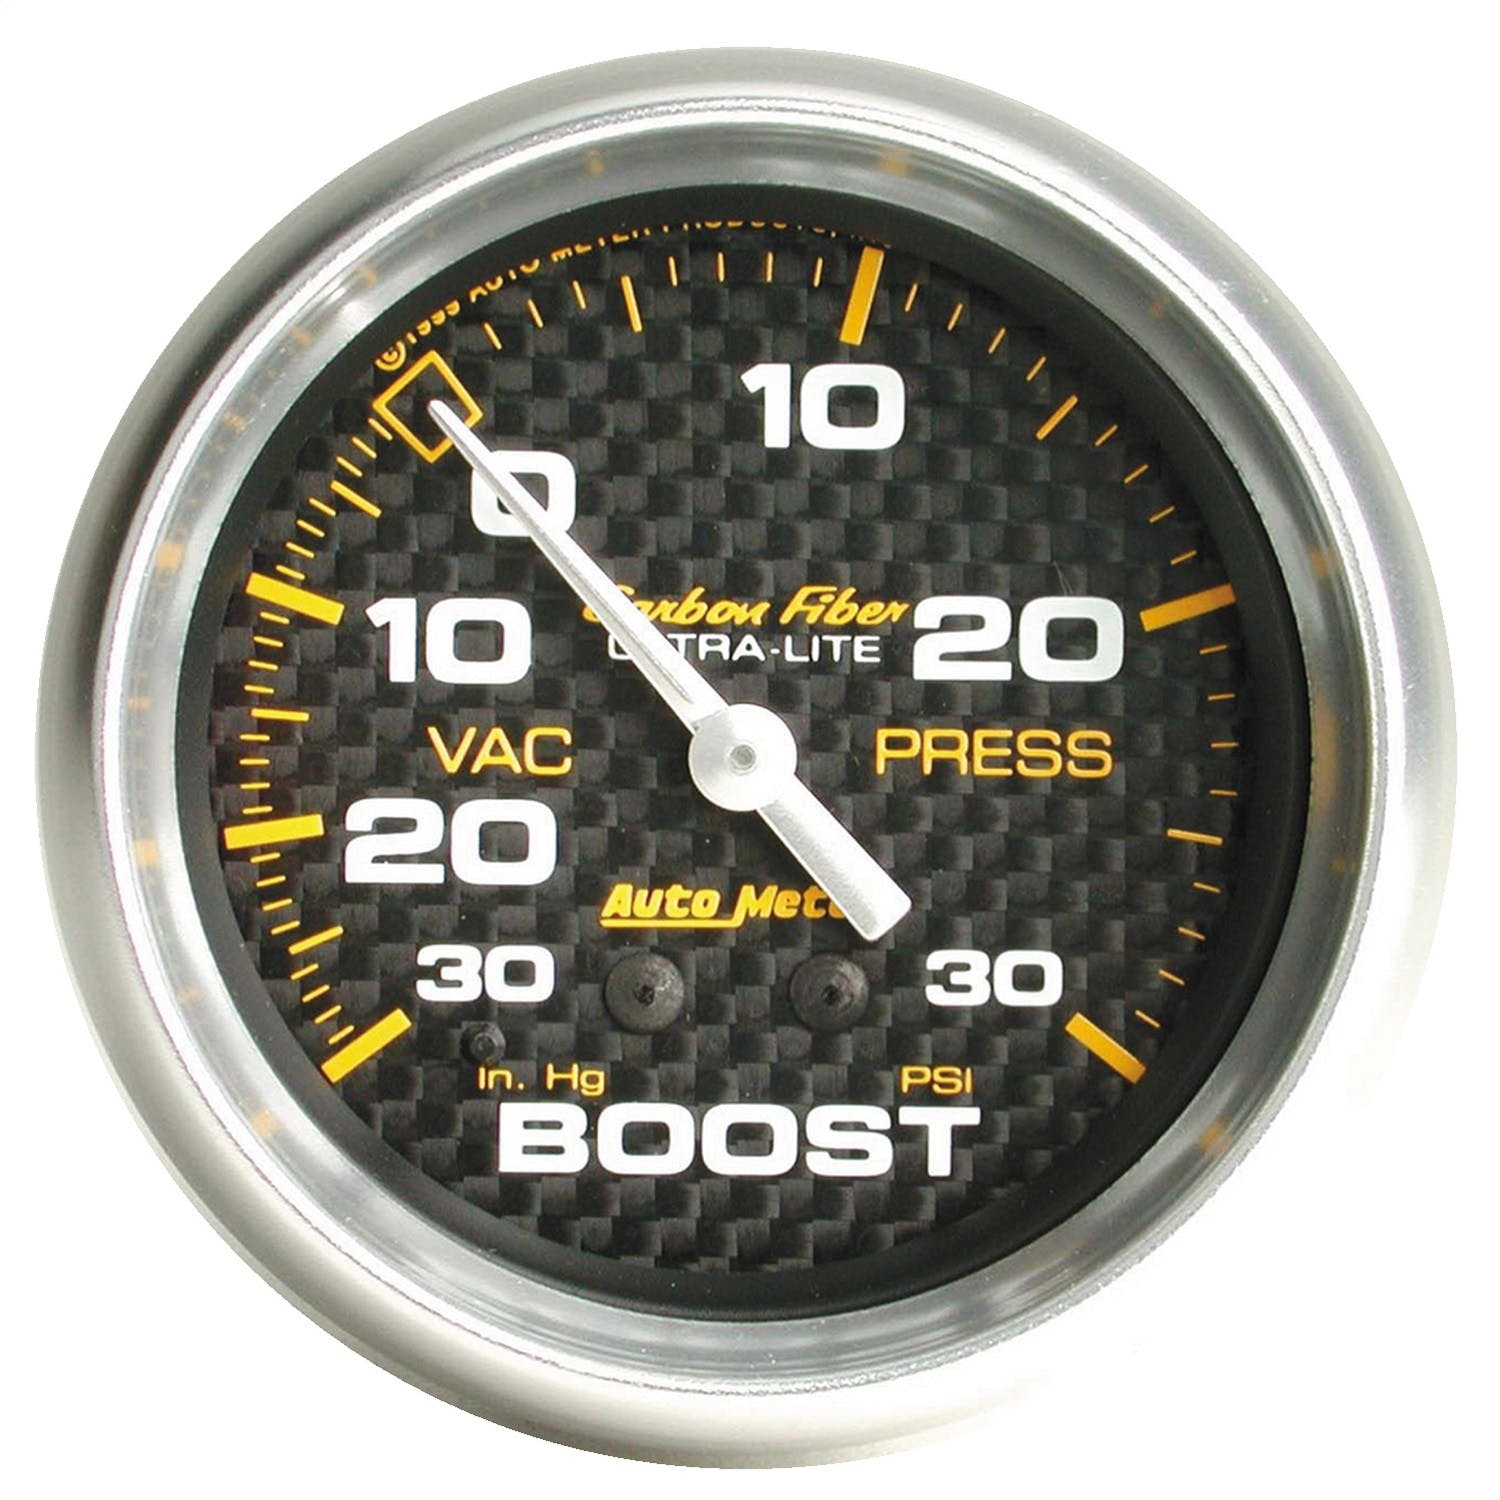 AutoMeter Products 4803 Boost/Vac 30 In. Hg/30 PSI